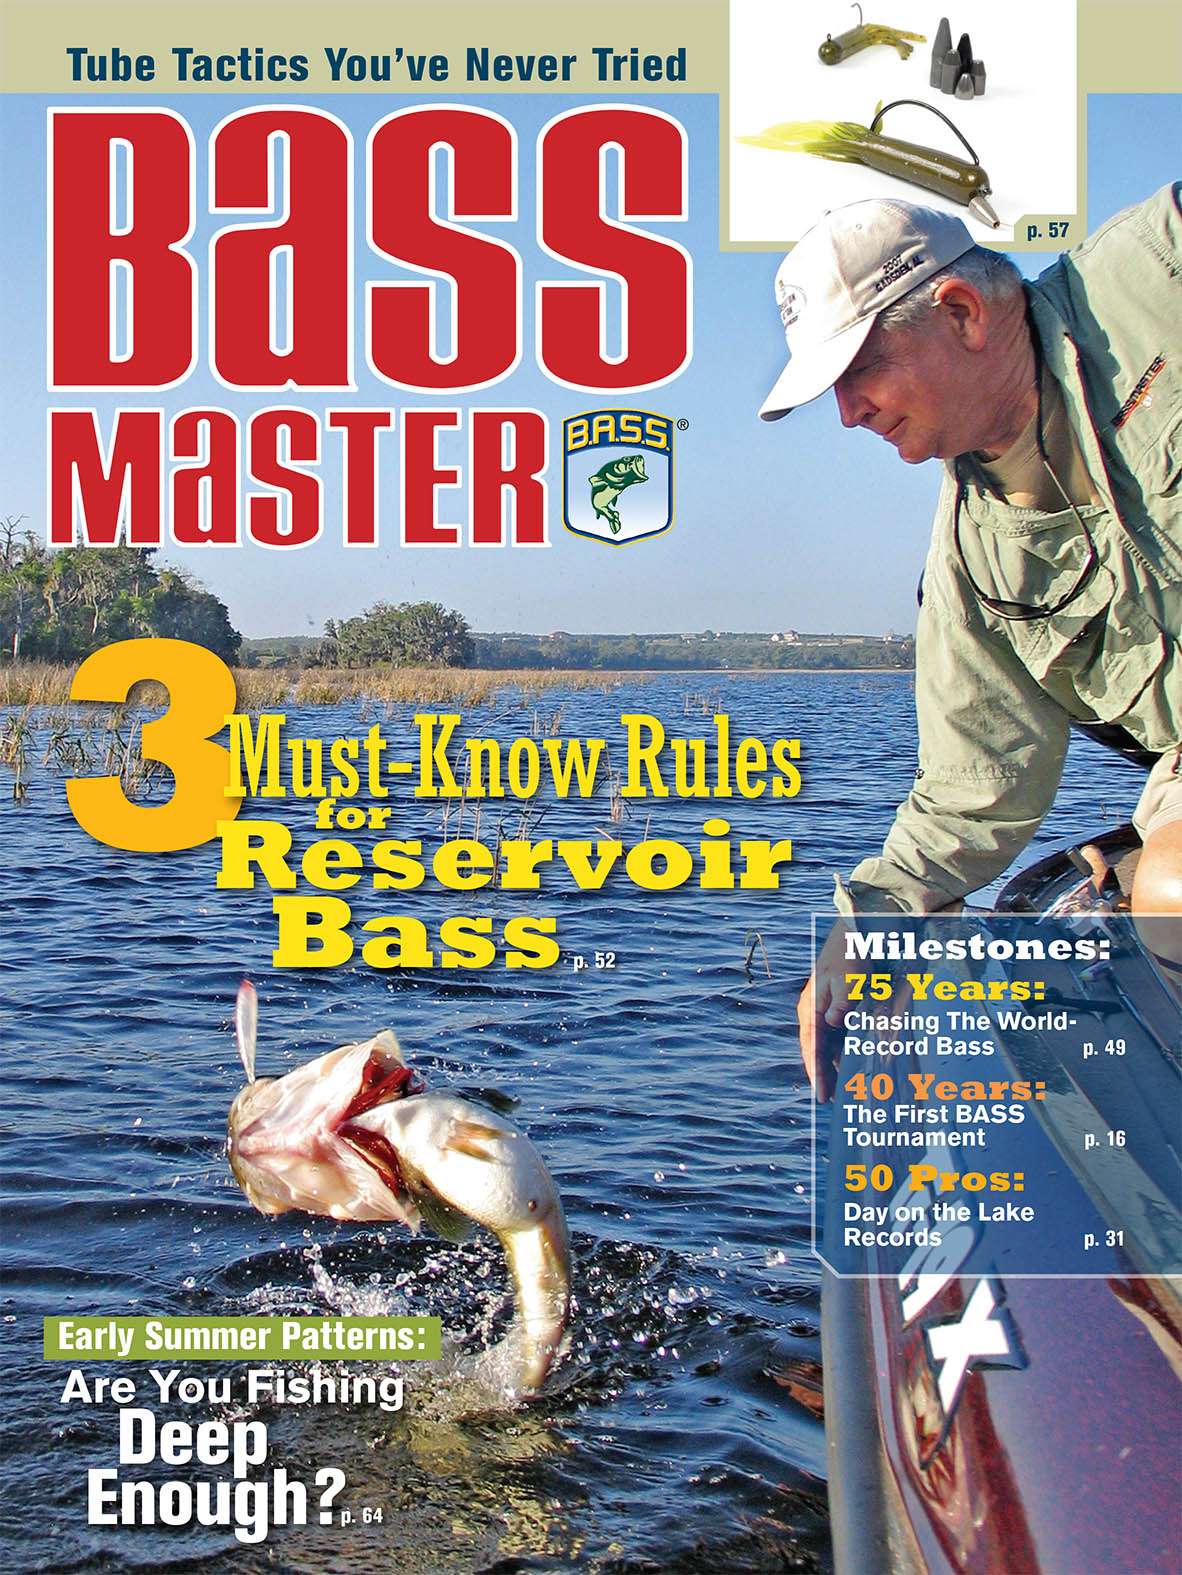 Dave also appeared on the cover in June 2007. 